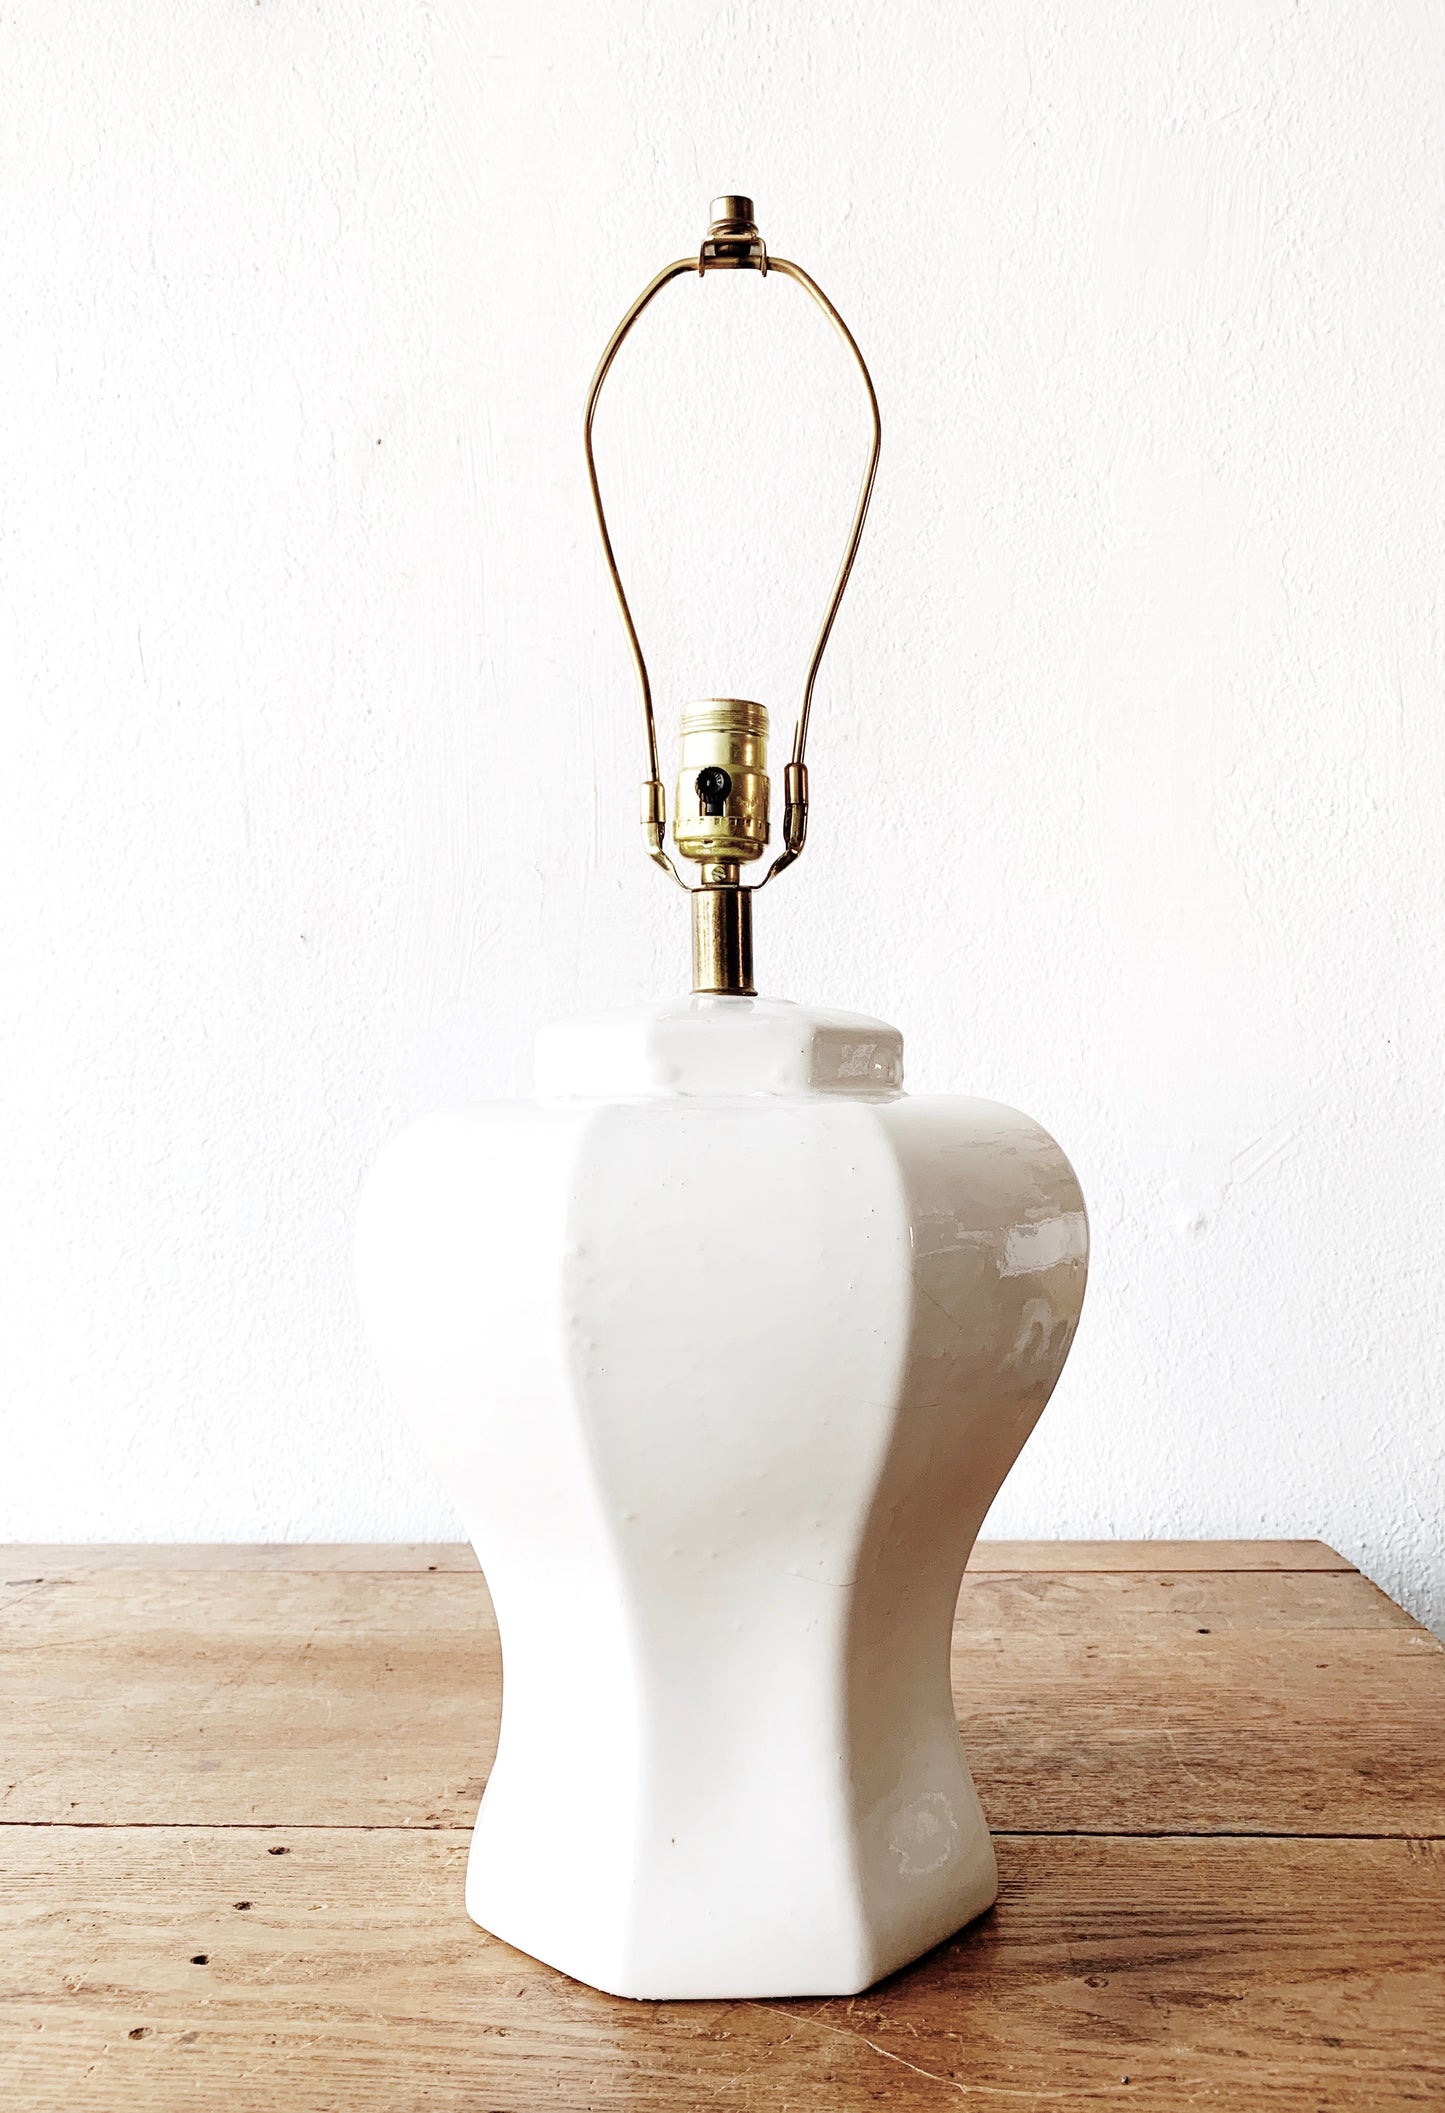 Vintage white Ceramic Lamp with Linen Shade